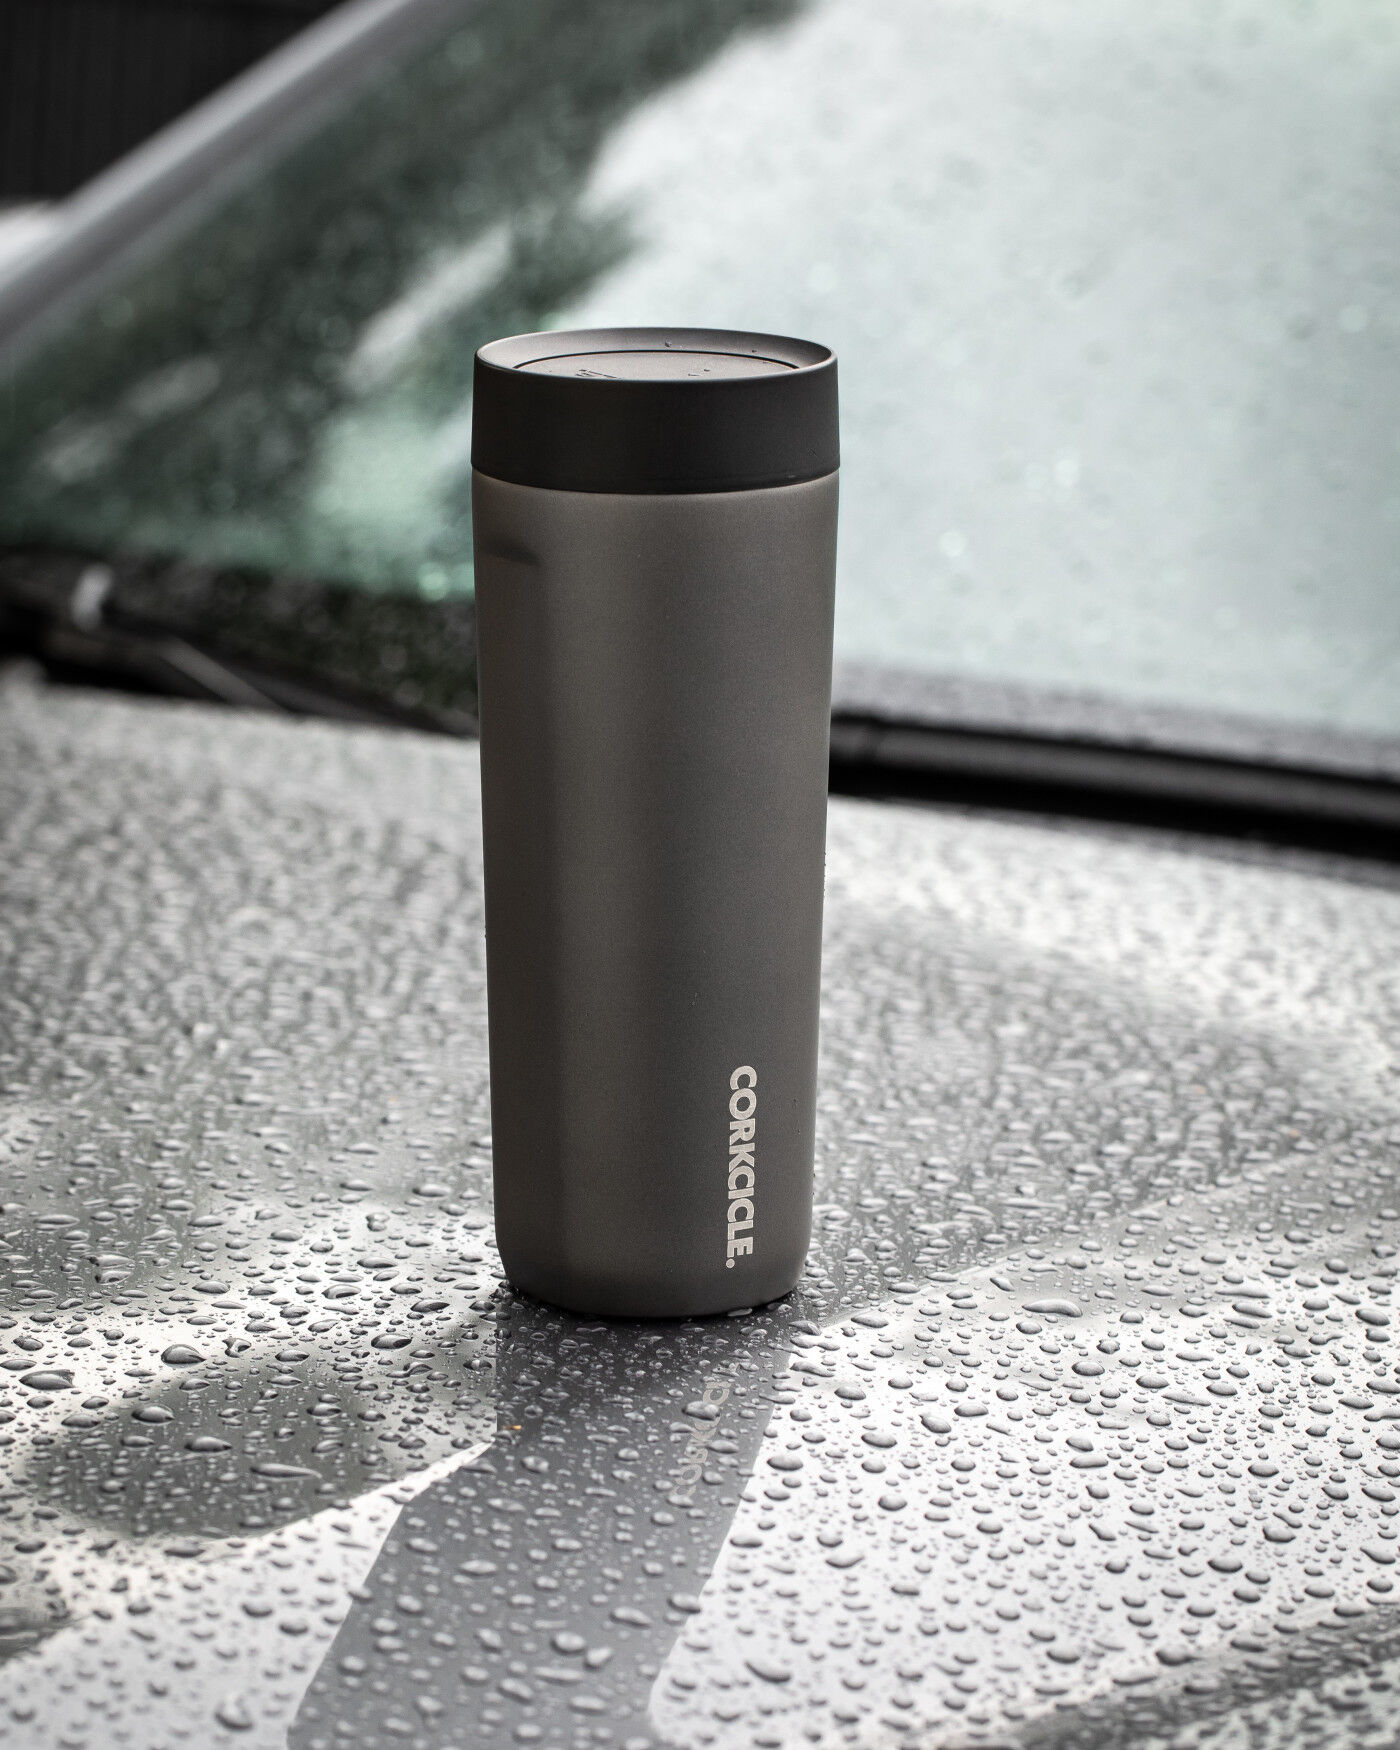 https://www.drivemerch.com/wp-content/uploads/2022/10/branded-corkcicle-commuter-cup-17oz-slate-lifestyle.jpg